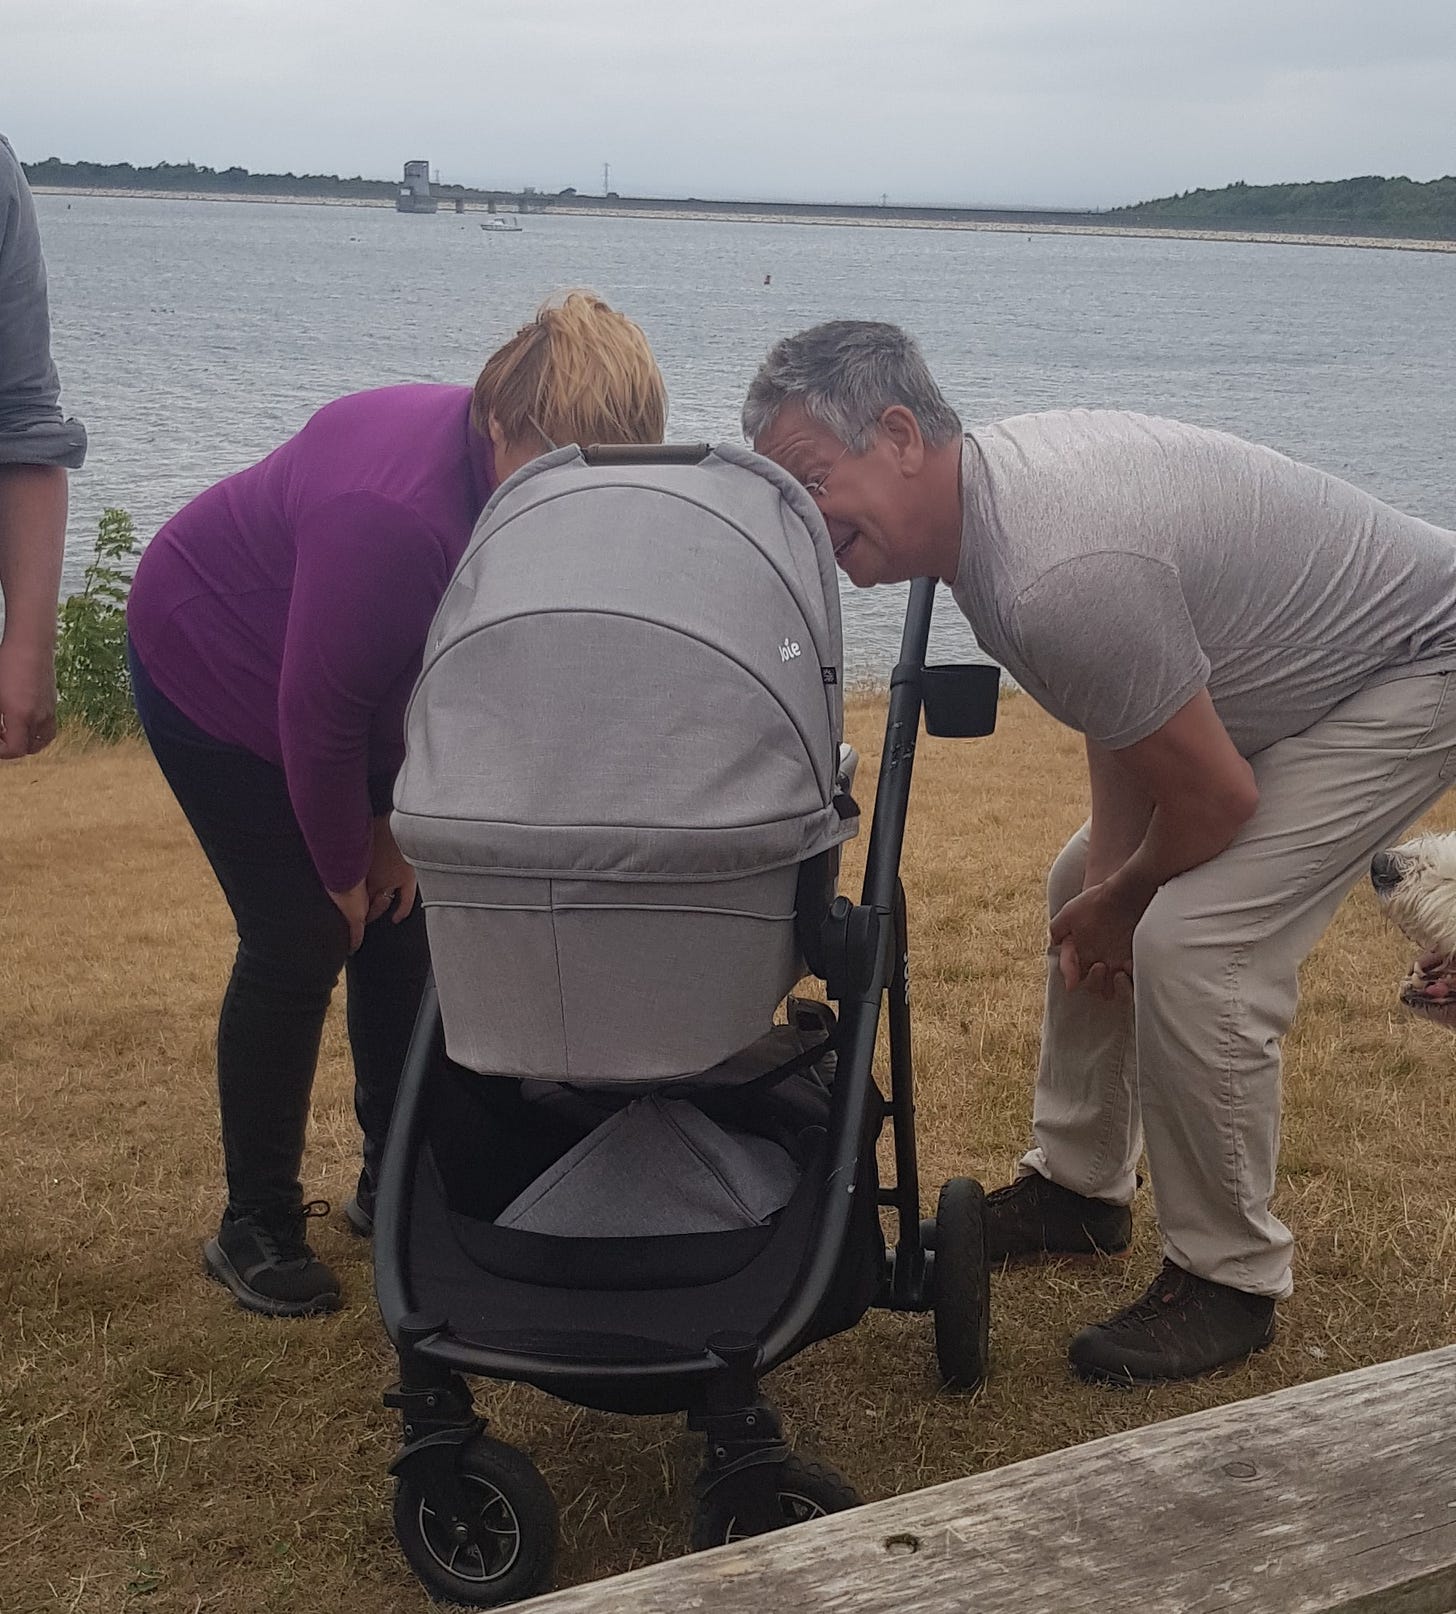 Two adults bent over with their heads looking into a baby's pram